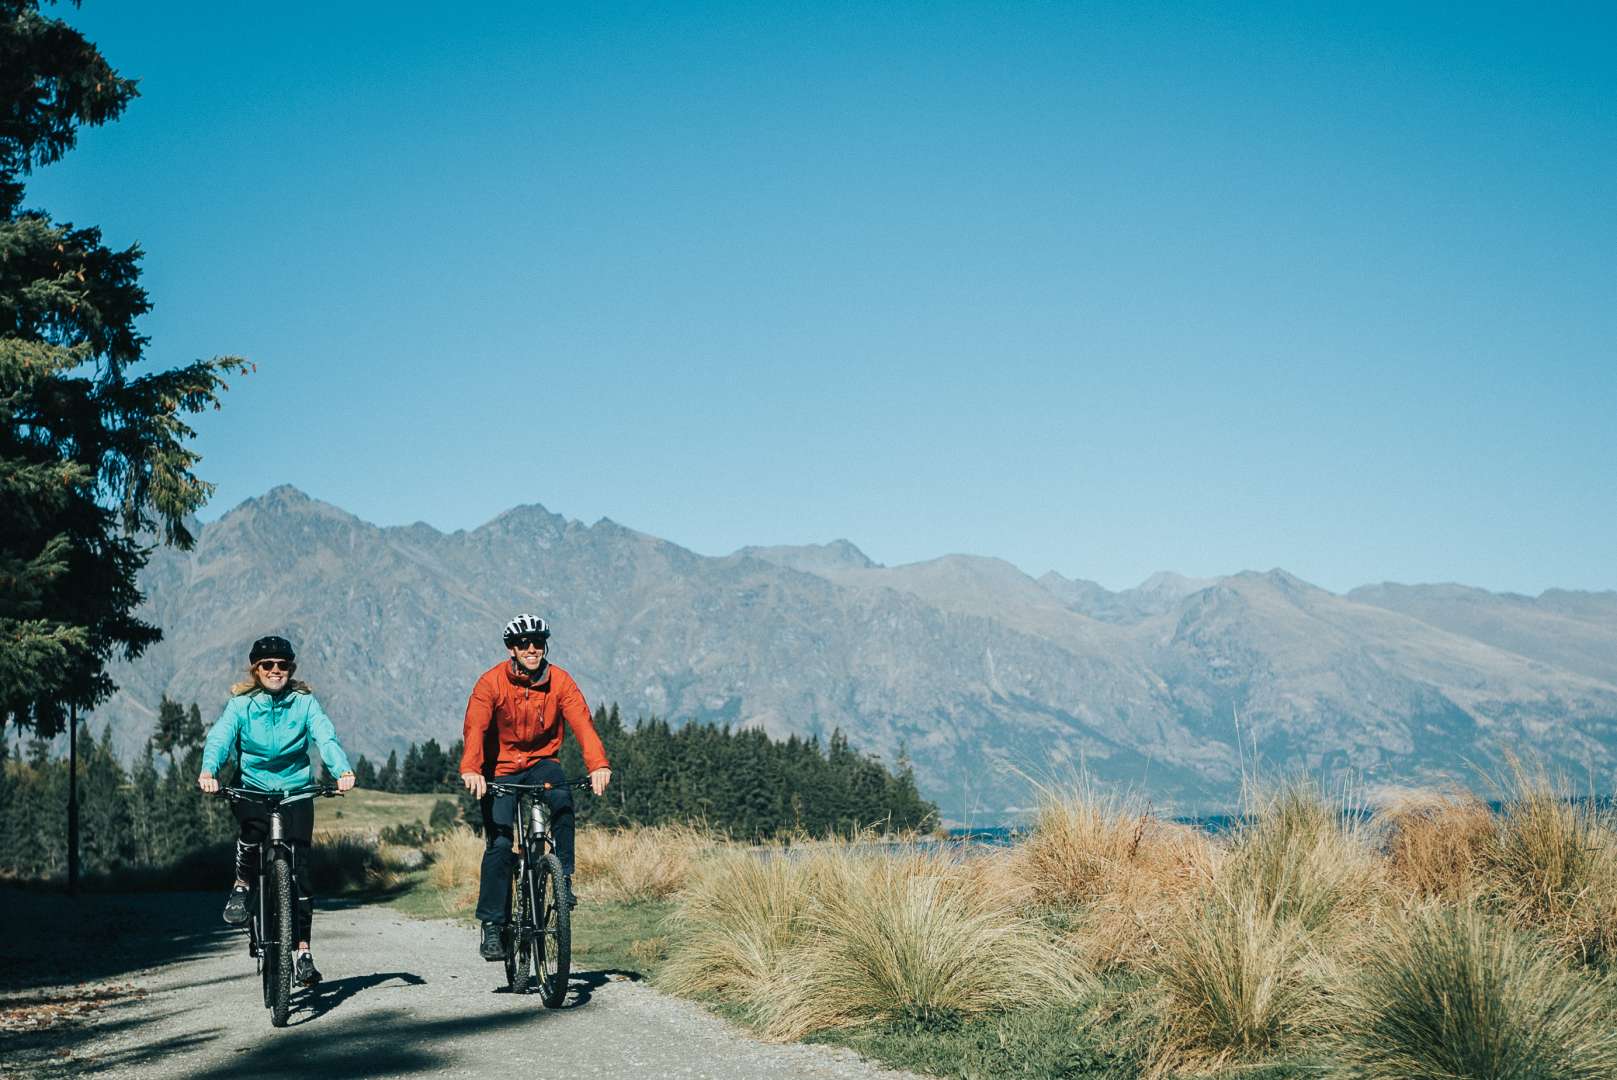 Hire a Bike and Explore the stunning Queenstown Trail network